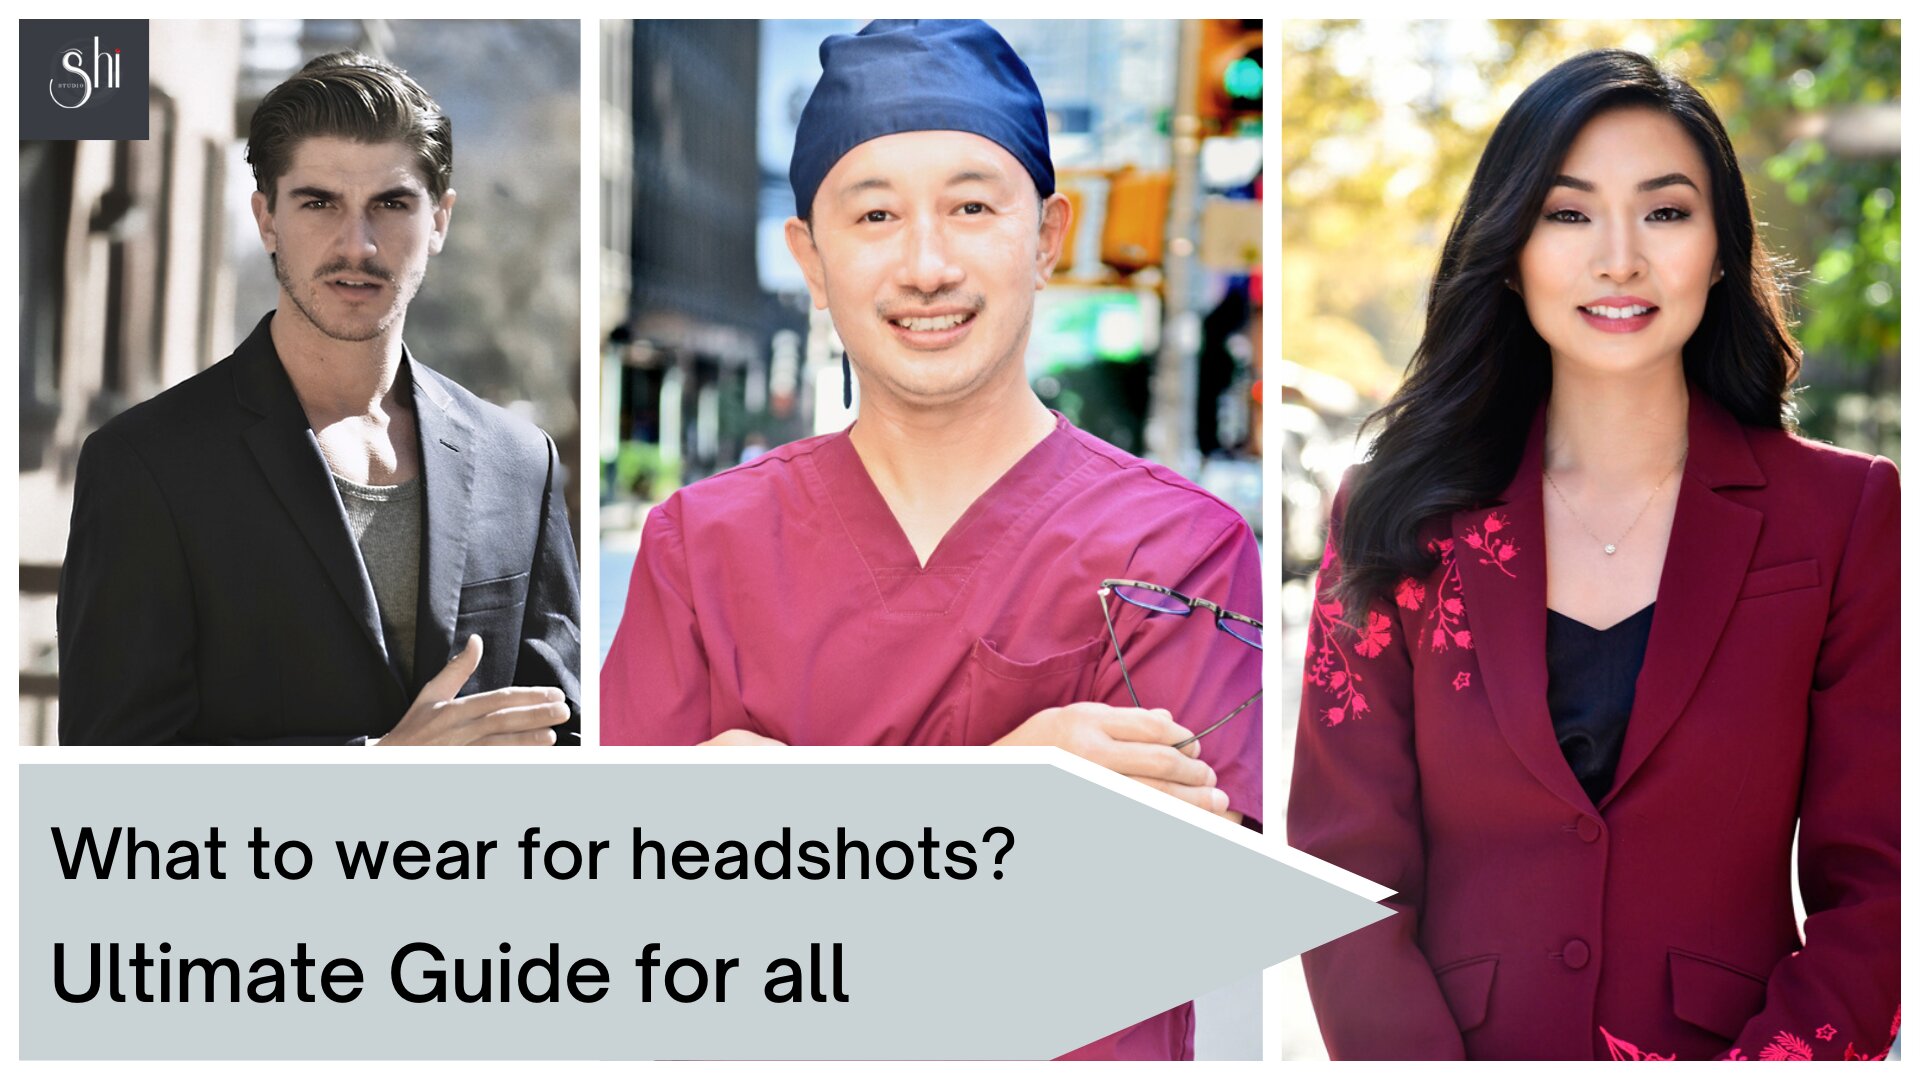 What to wear for headshots? Ultimate Guide for all